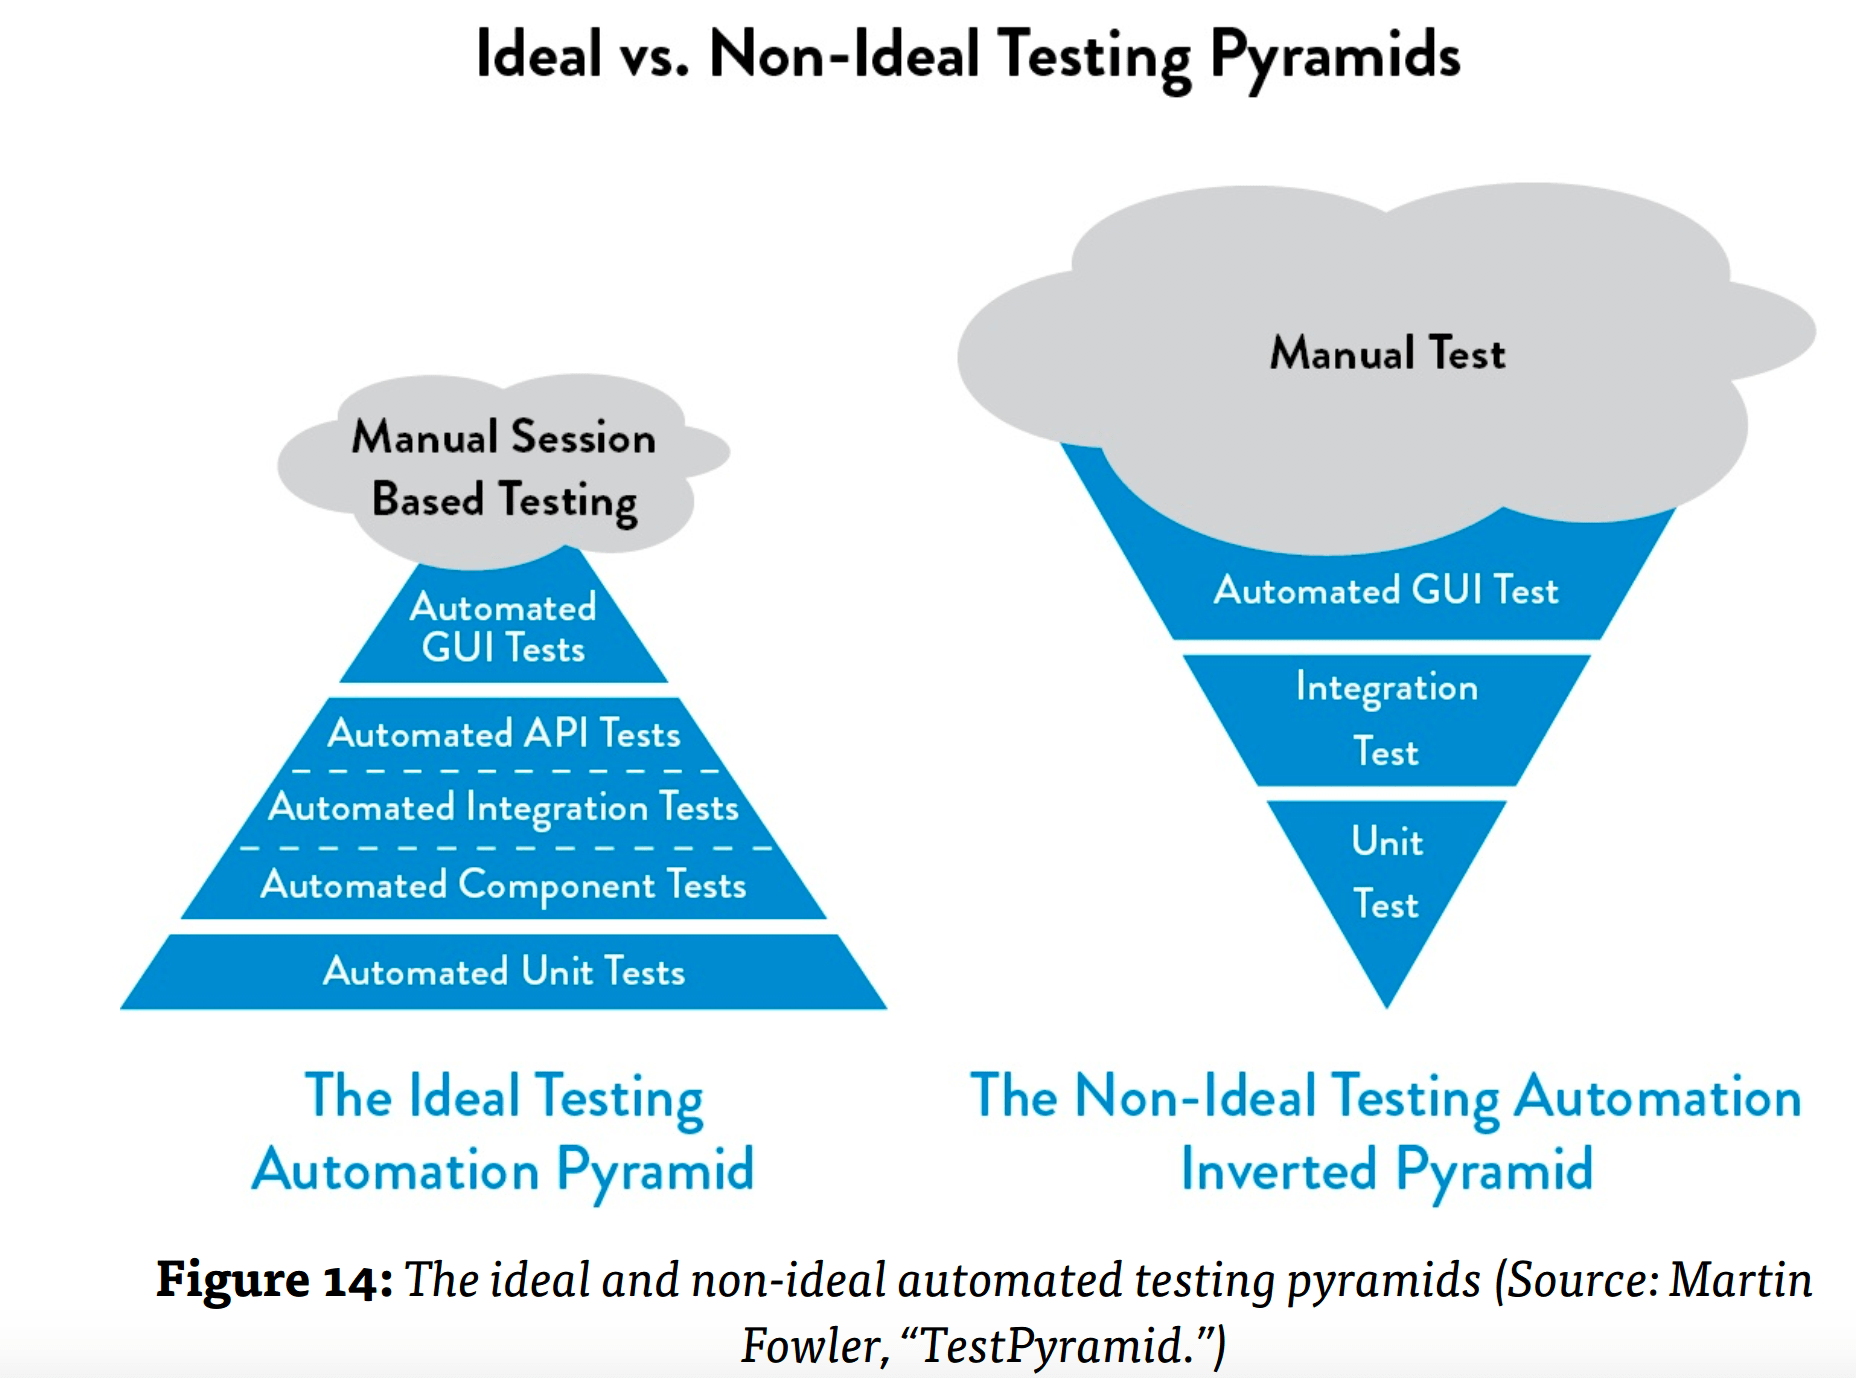 The ideal and non-ideal automated testing pyramids